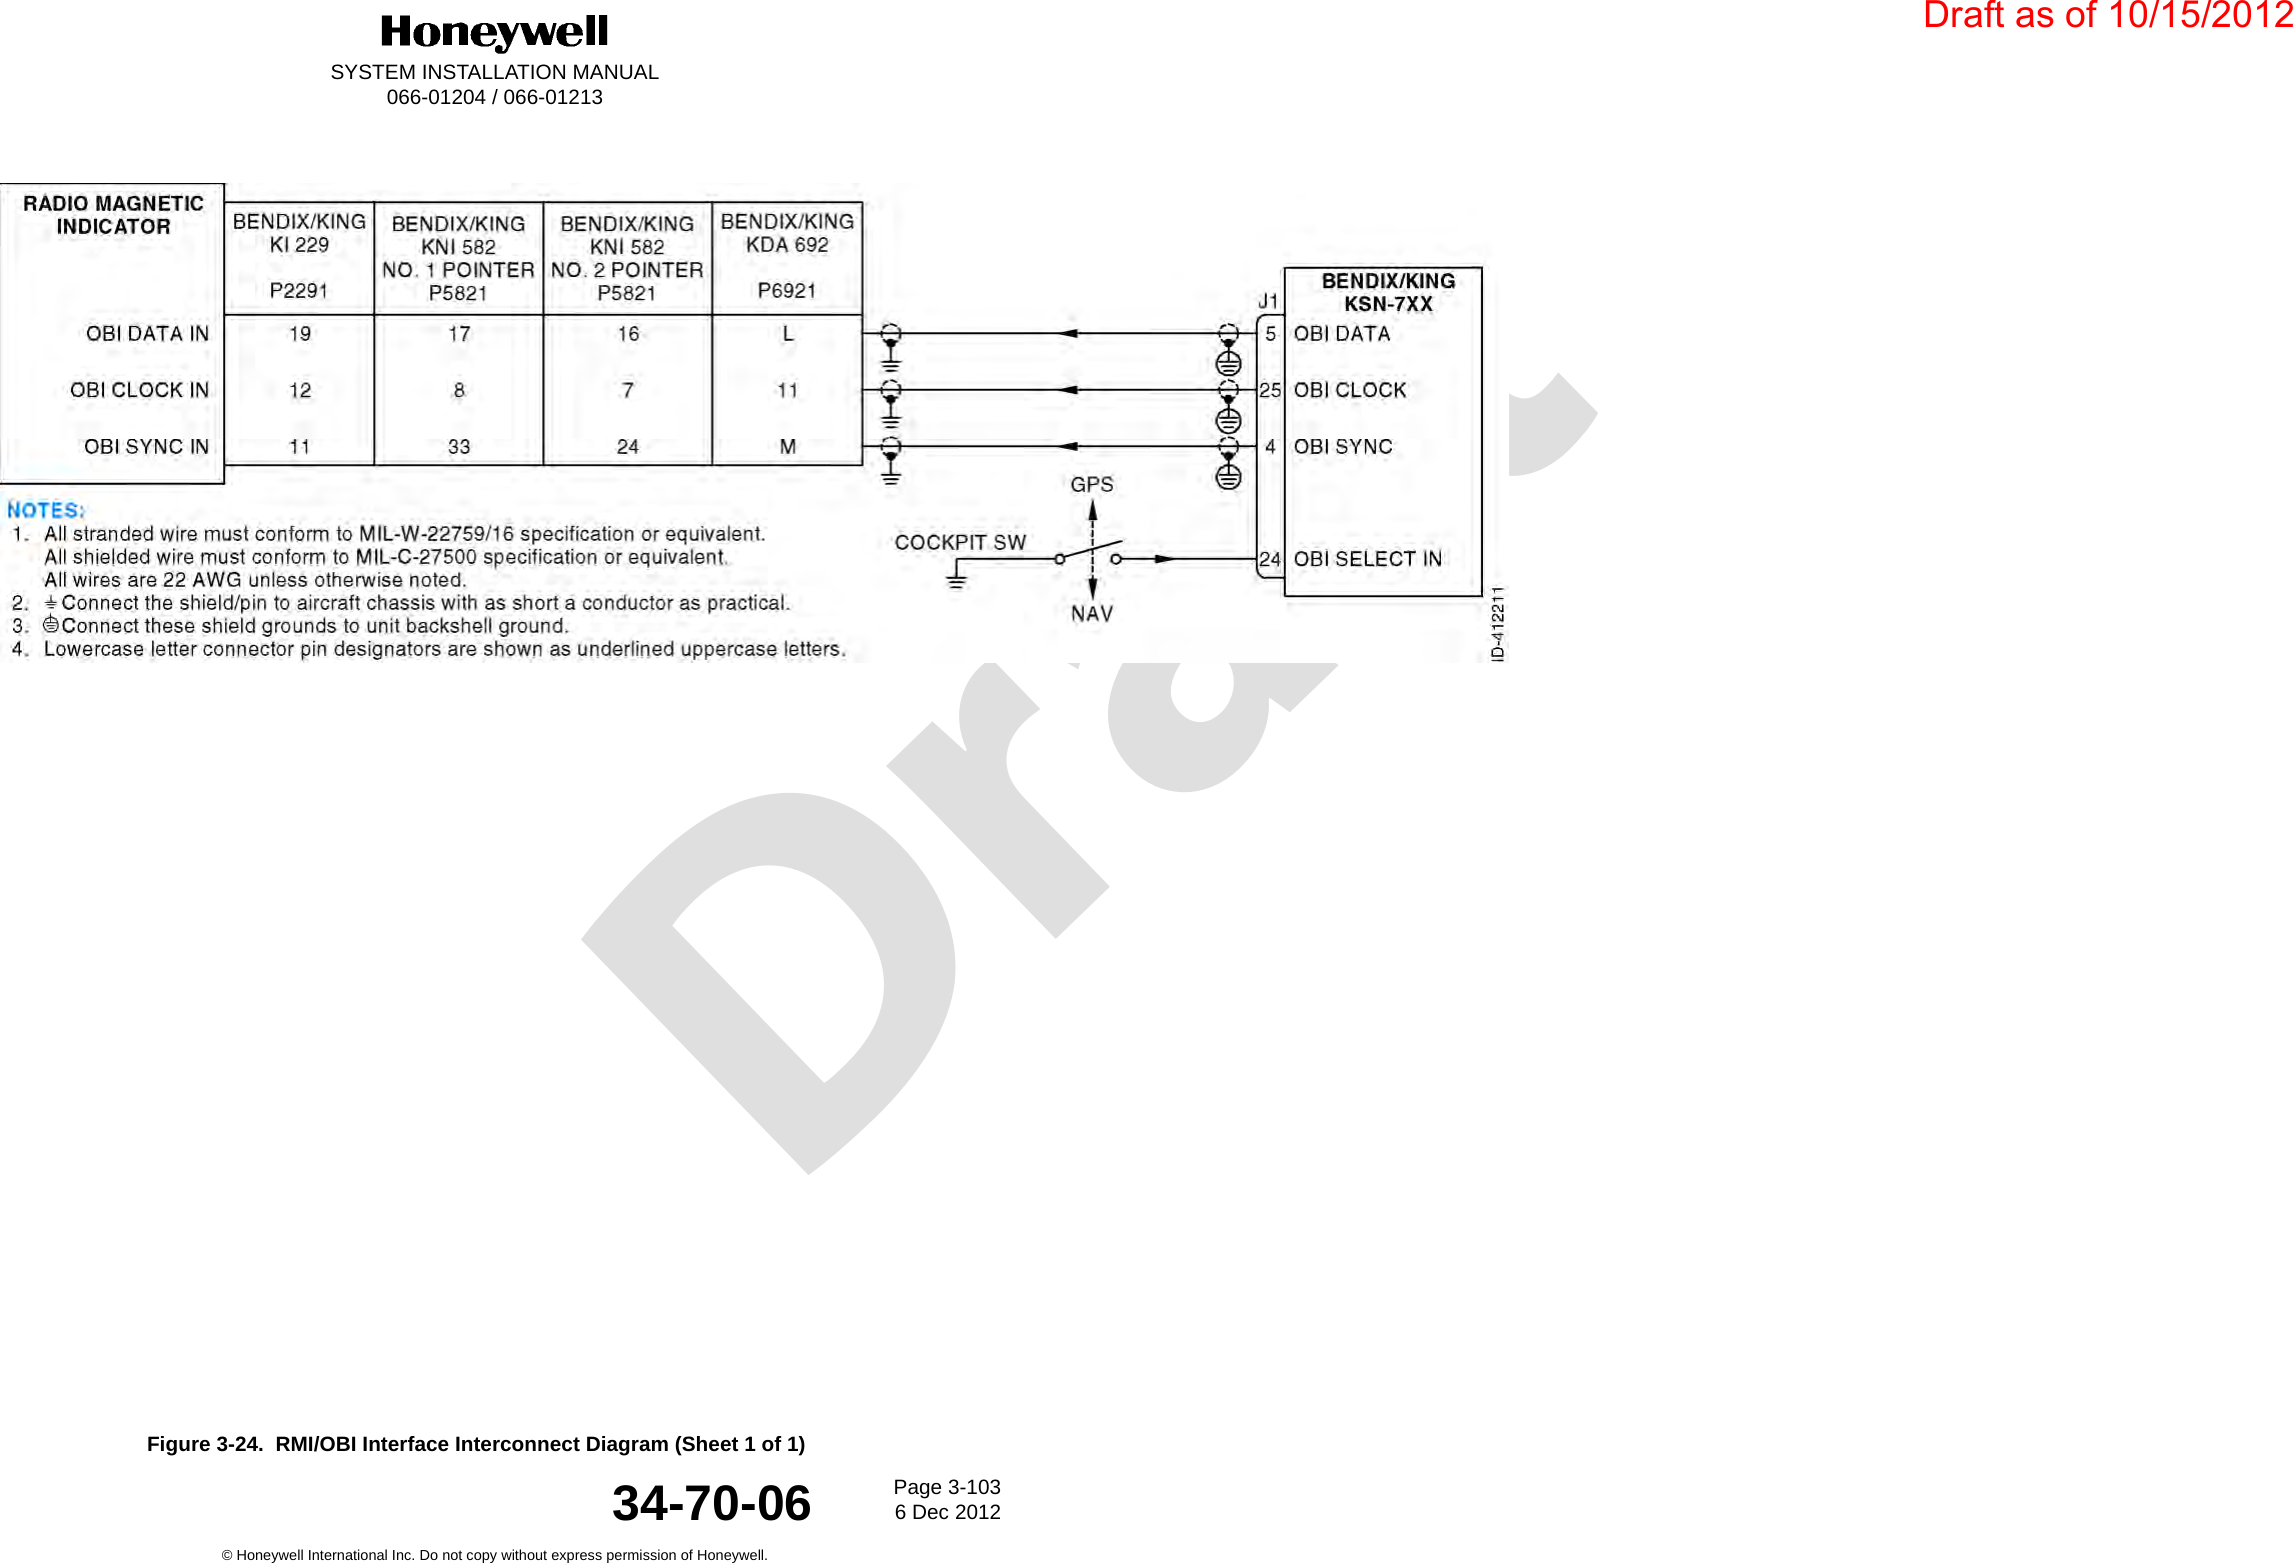 DraftSYSTEM INSTALLATION MANUAL066-01204 / 066-01213Page 3-1036 Dec 2012© Honeywell International Inc. Do not copy without express permission of Honeywell.34-70-06Figure 3-24.  RMI/OBI Interface Interconnect Diagram (Sheet 1 of 1)Draft as of 10/15/2012